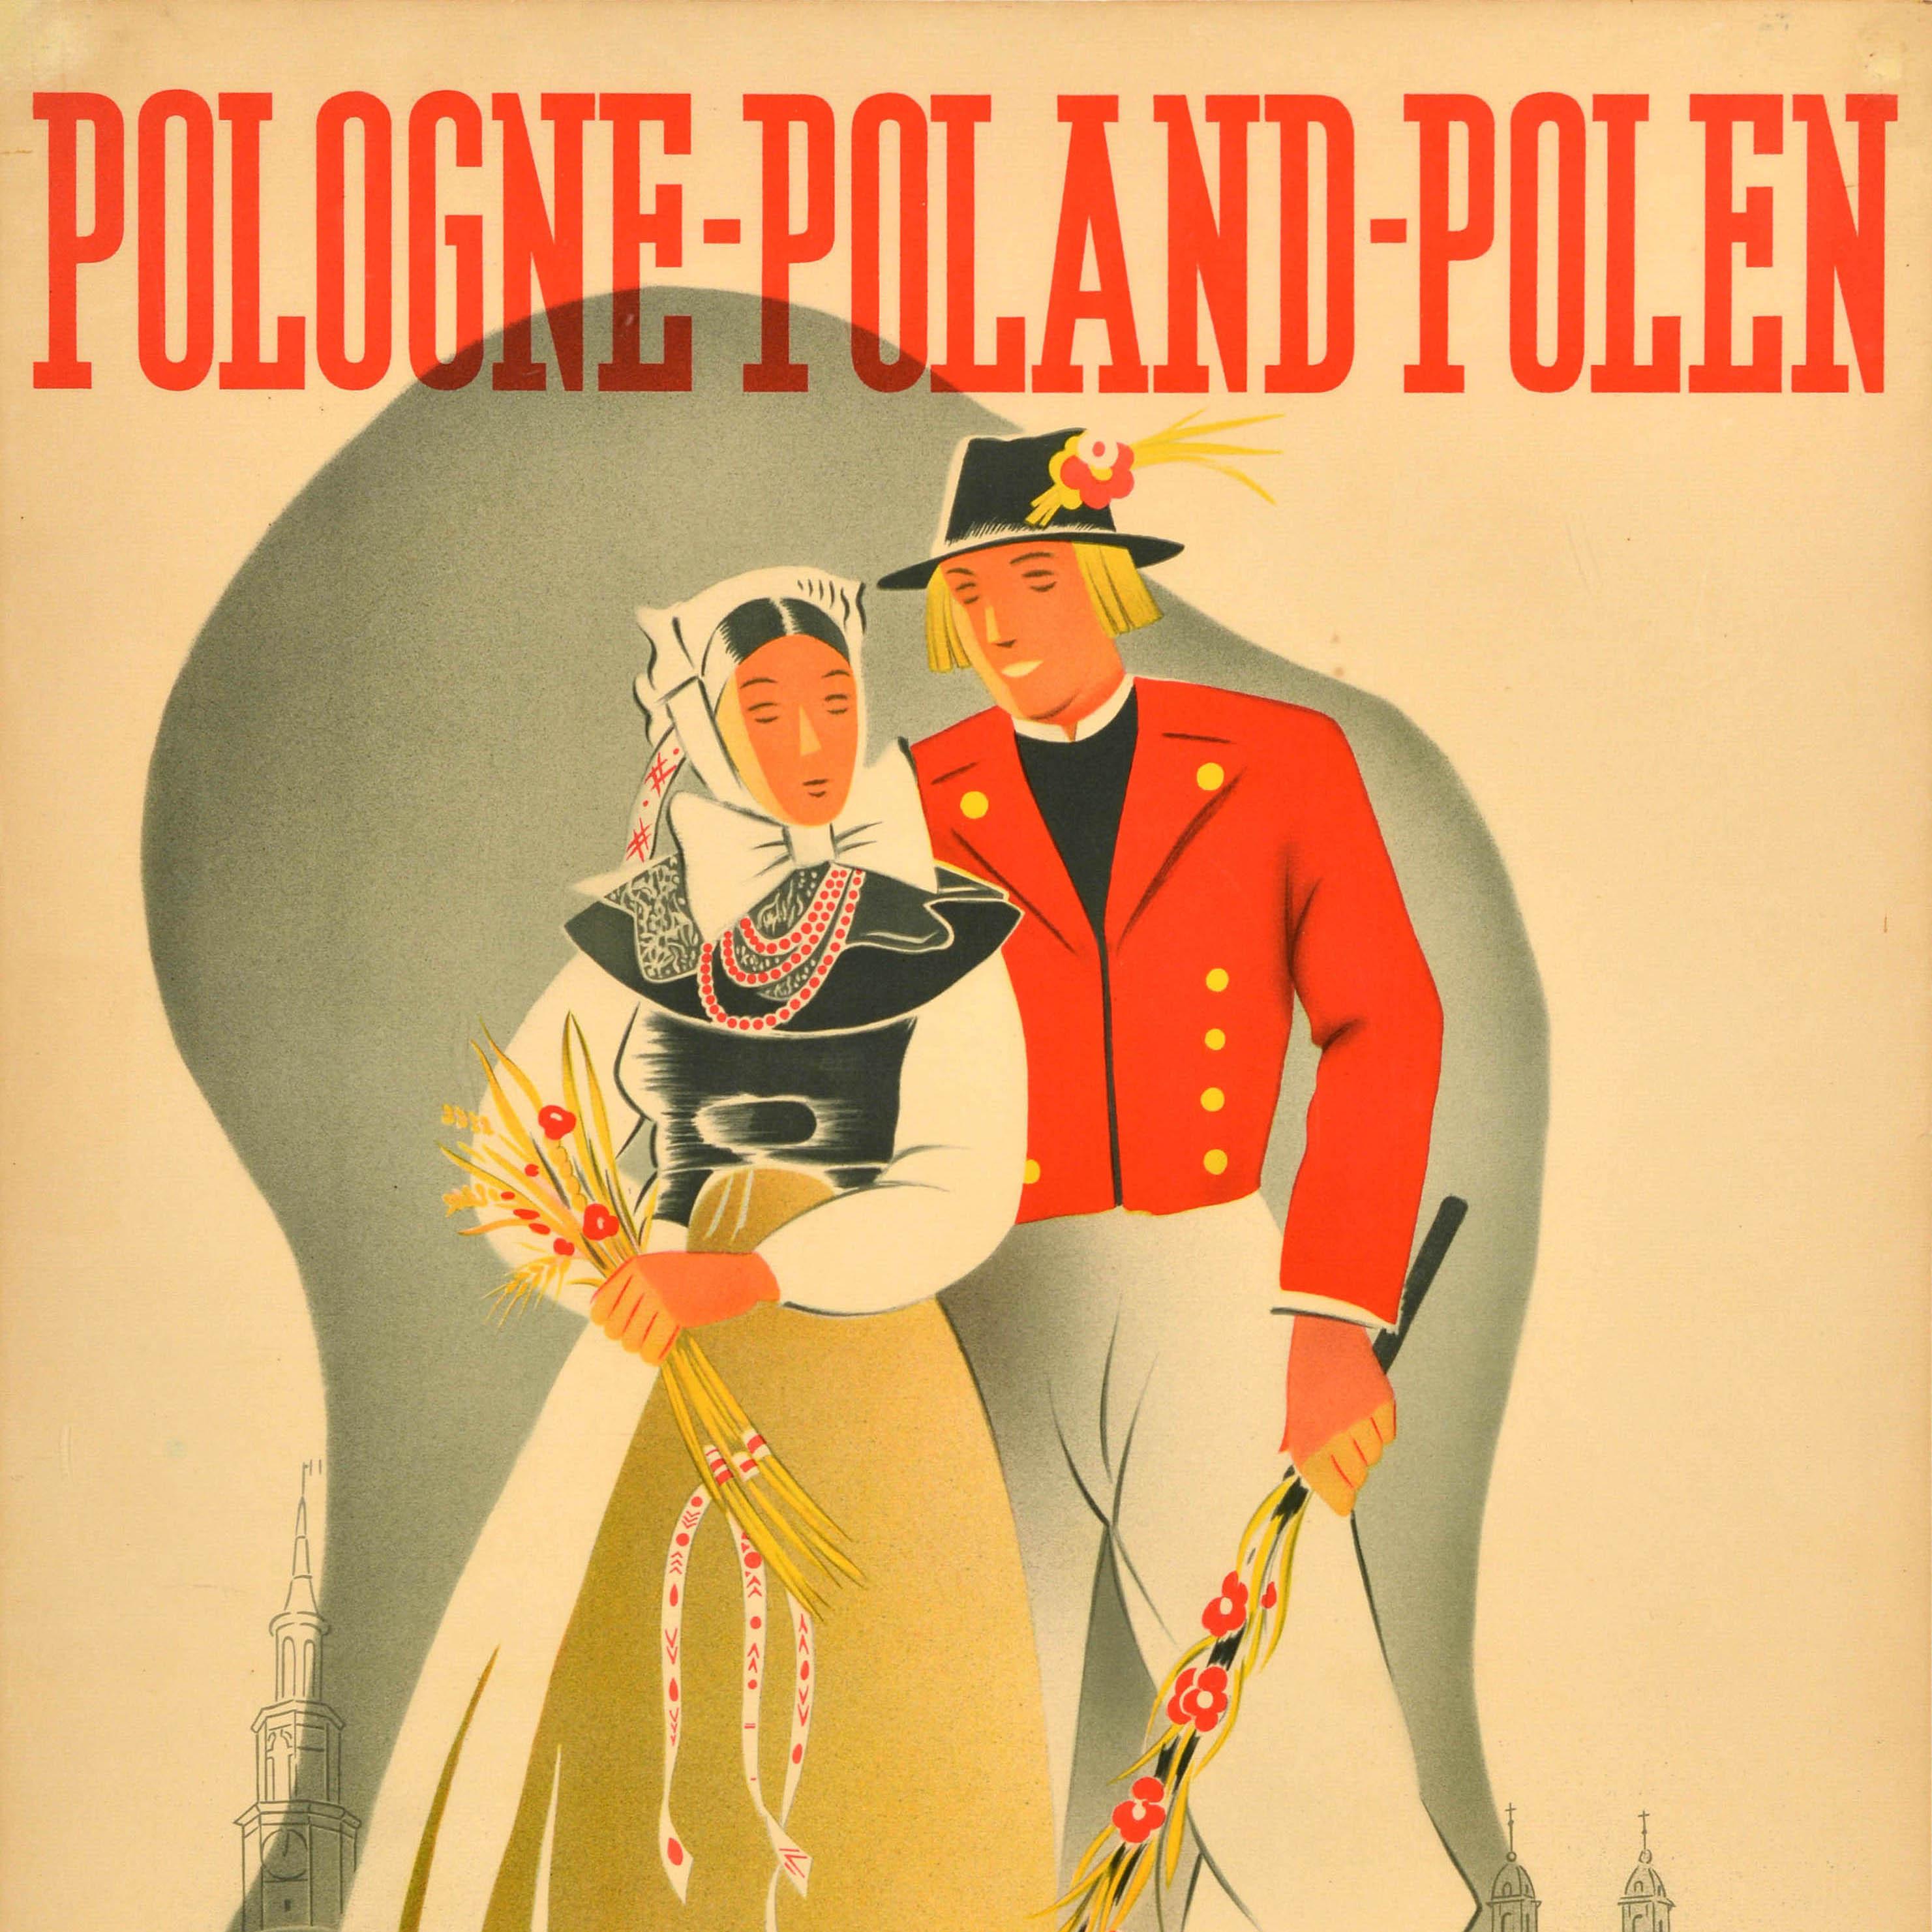 Original vintage travel poster for Pologne Poland Polen Visitez Visit Besuchet Poznan et ses Environs and Environs und Umgebung featuring a couple in traditional clothing holding flowers and wheat with an outline of the city's historical buildings